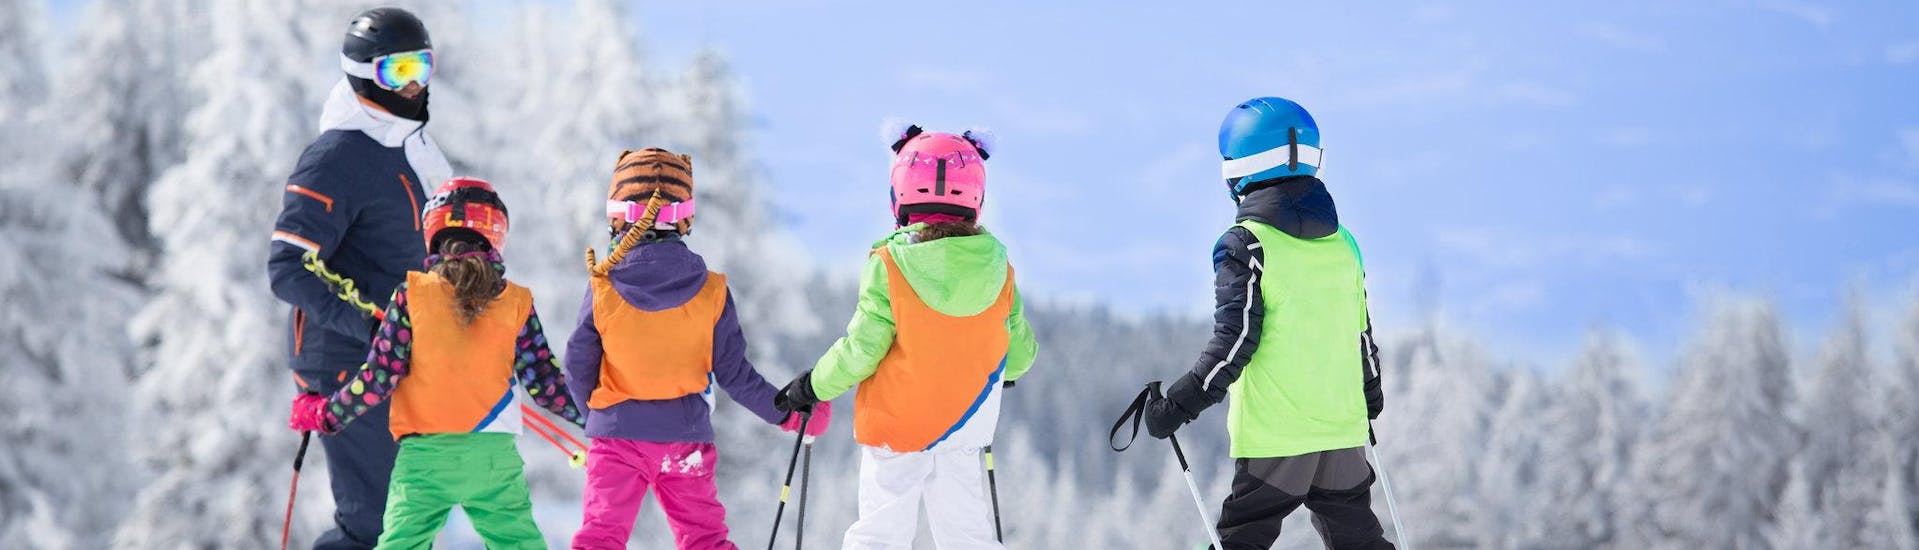 3 skiers prepare for their ski lessons in English in the ski resort of Schlick 2000 - Fulpmes.